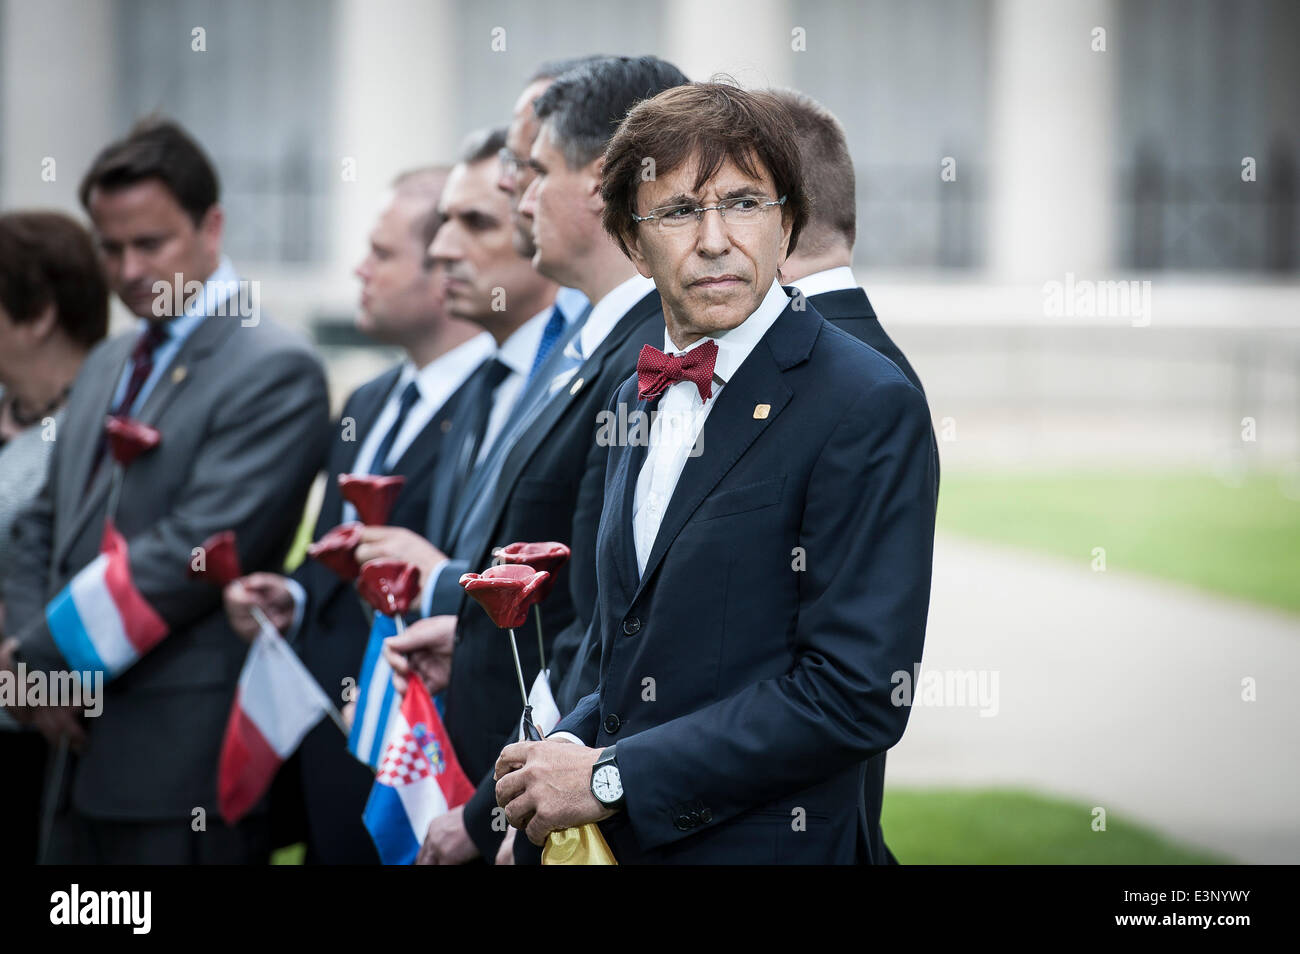 Ypres, Flanders, Belgium. 26th June, 2014. Belgium's Prime Minister Elio Di Rupo attends a ceremony marking the centenary of the outbreak of World War I, in Ypres, Belgium on 26.06.2014 During the war, hundreds of thousands of soldiers and civilians from all over the world lost their lives around the Belgian town of Ypres. To mark the occasion, the European Union donated a symbolic bench with bronzed copper plates reading the word 'Peace' in the EU's 24 official languages. Credit:  ZUMA Press, Inc./Alamy Live News Stock Photo